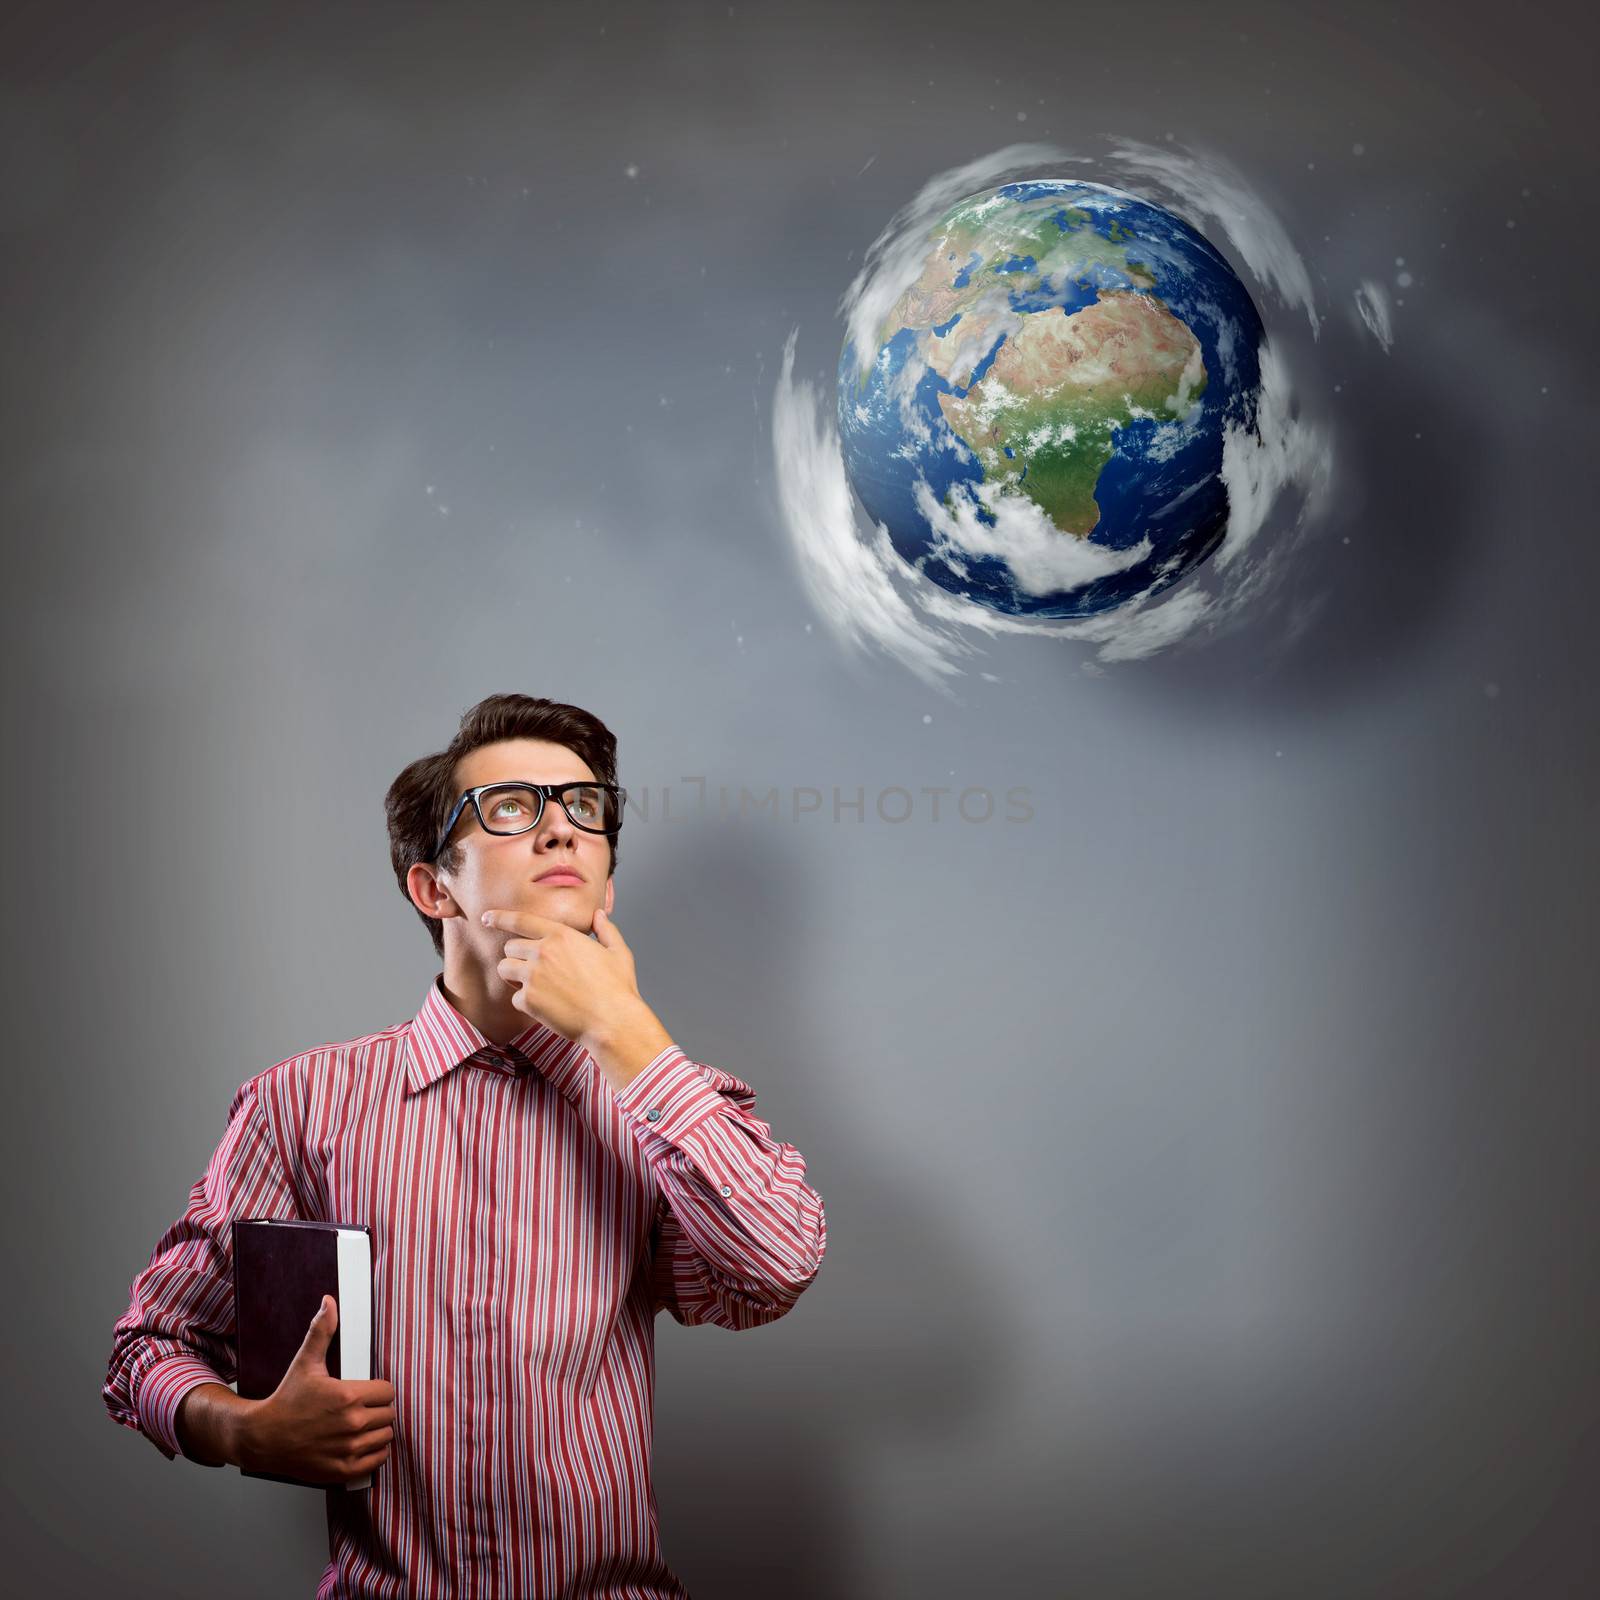 young man with a book thinks. it over planet Earth with clouds. an image of NASA.